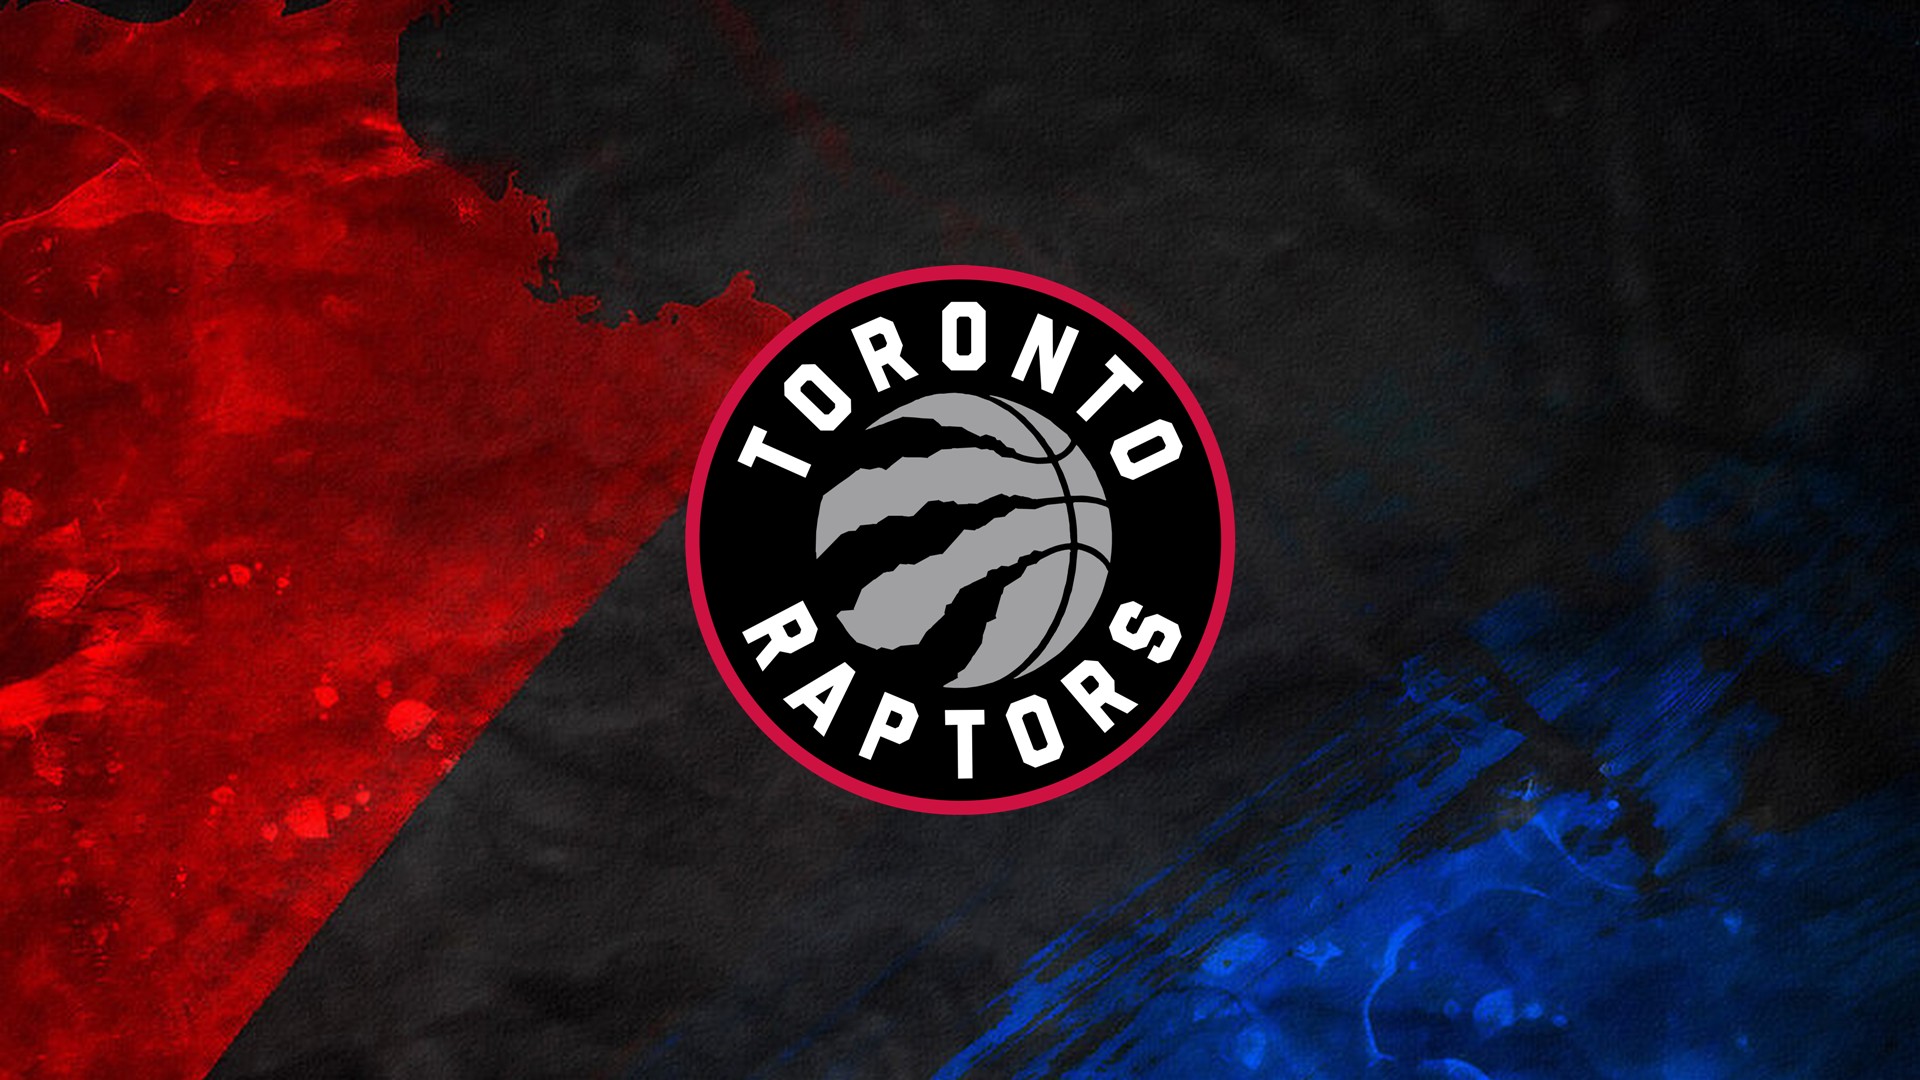 HD Desktop Wallpaper NBA Raptors with image dimensions 1920x1080 pixel. You can make this wallpaper for your Desktop Computer Backgrounds, Windows or Mac Screensavers, iPhone Lock screen, Tablet or Android and another Mobile Phone device